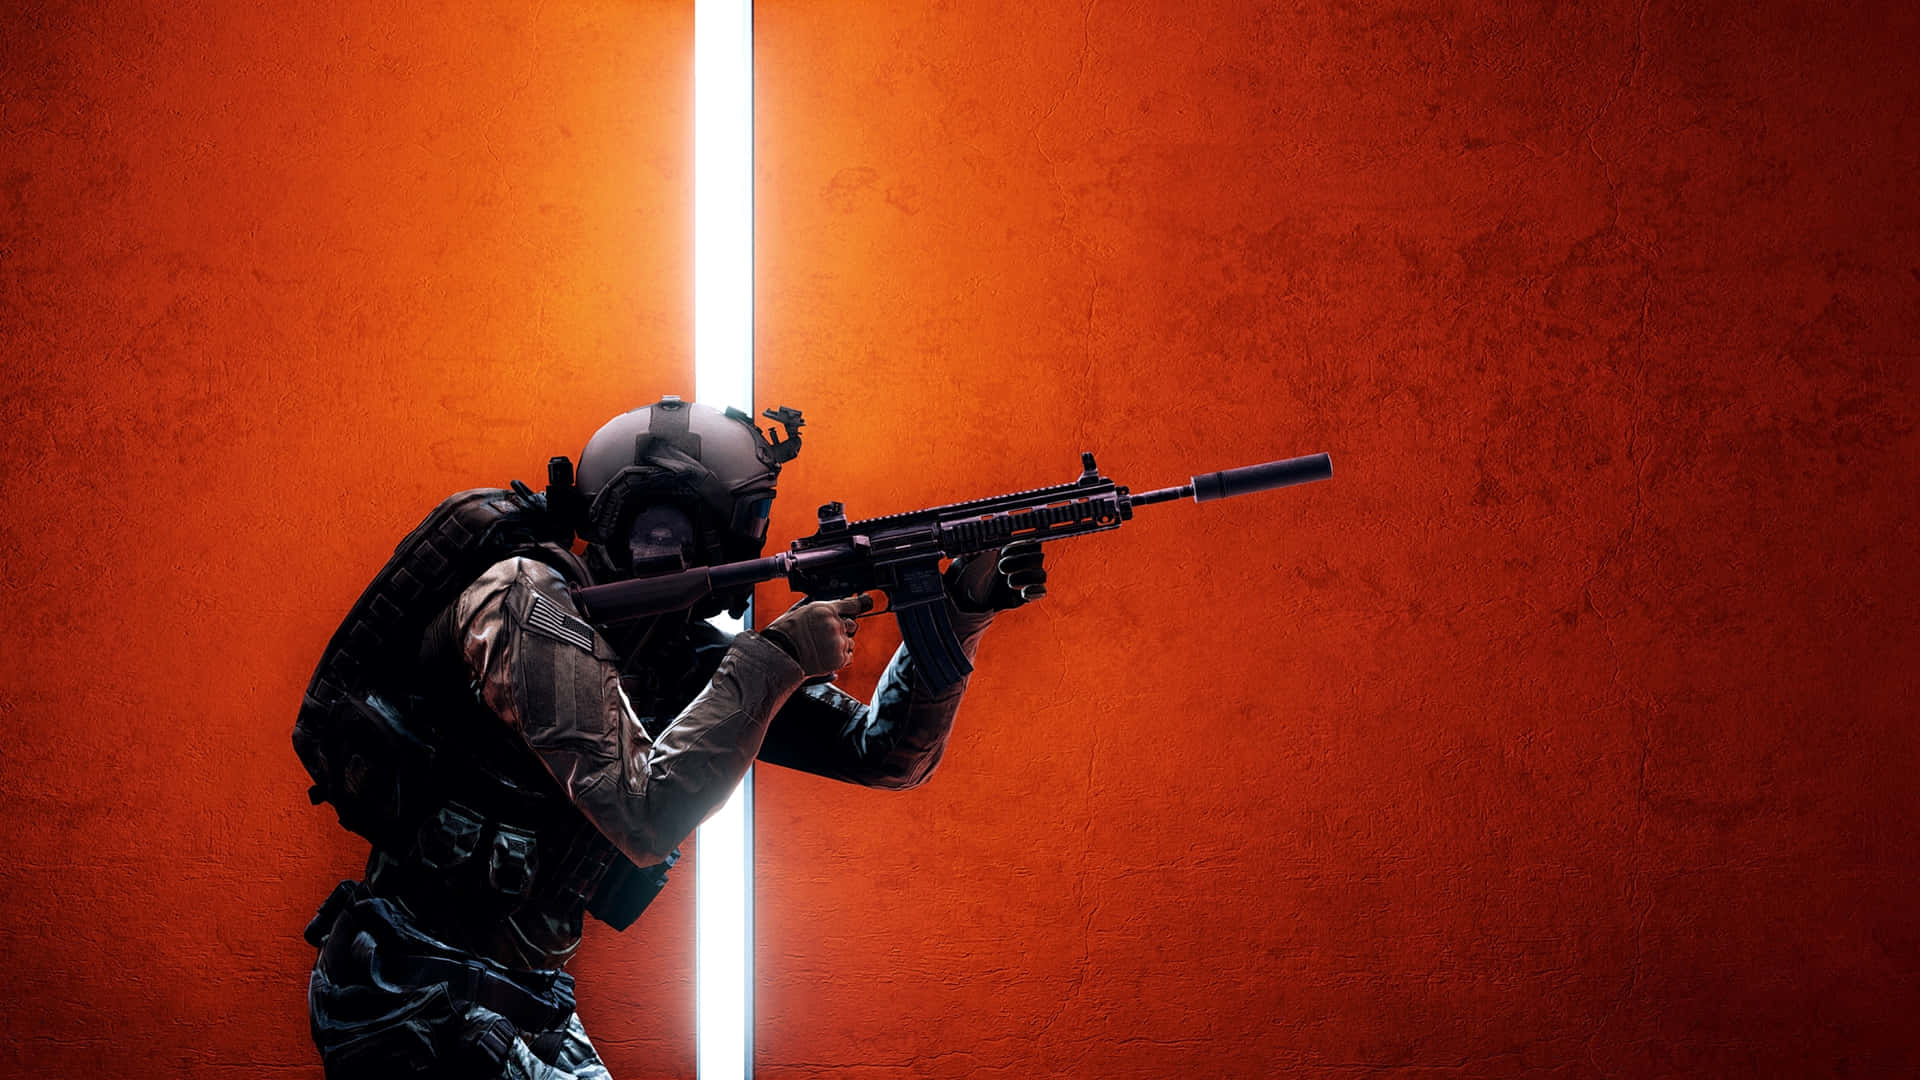 Take on your enemies with full force in Battlefield 4